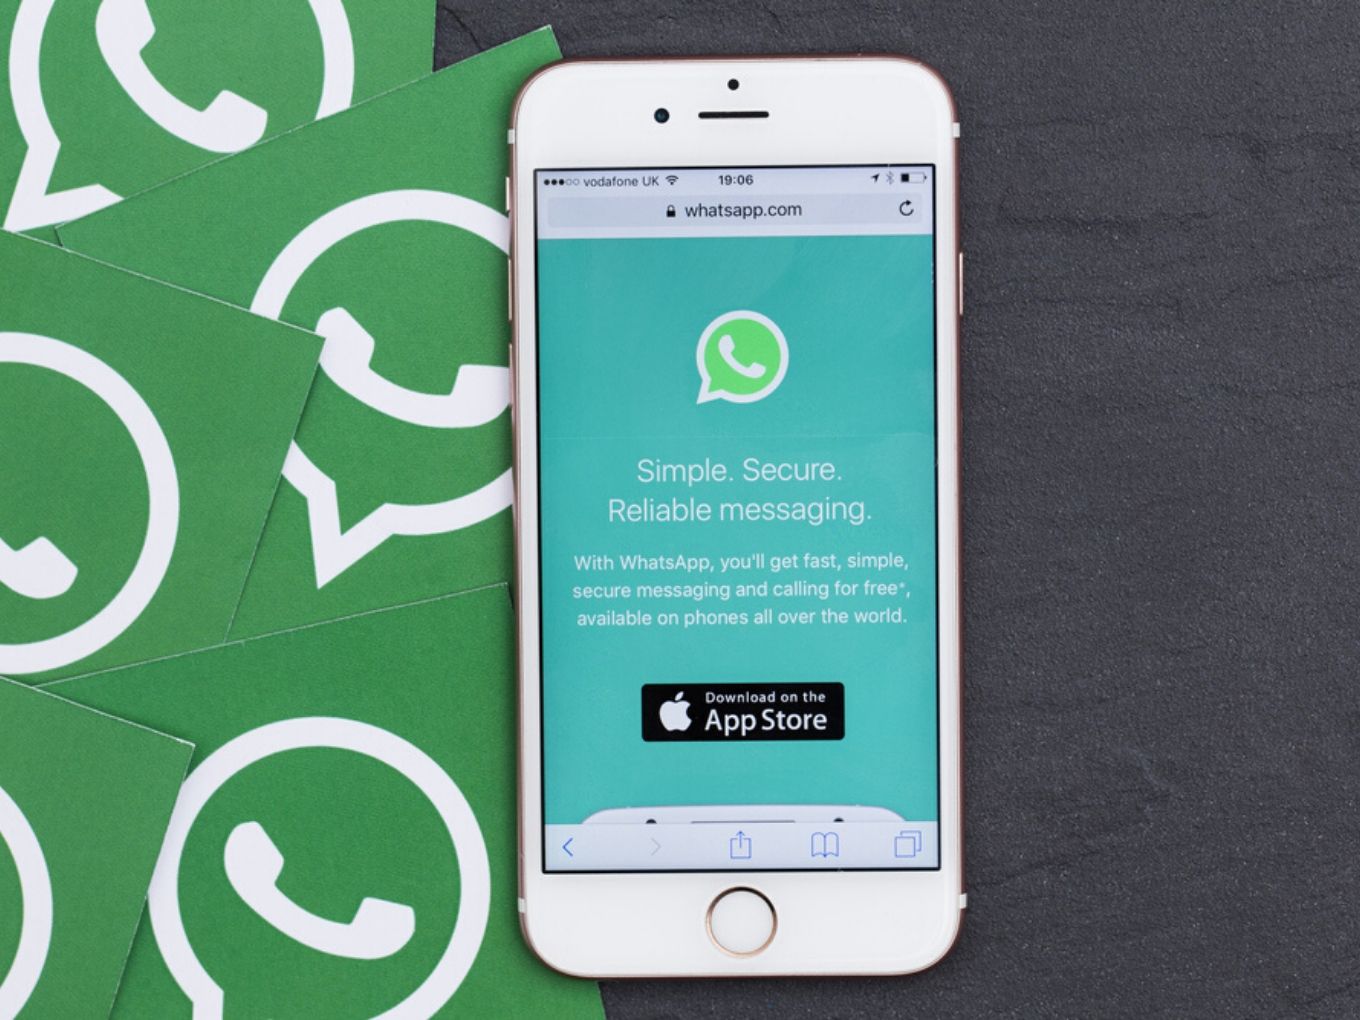 No Ads On WhatsApp As Facebook Scraps Plan For Time Being